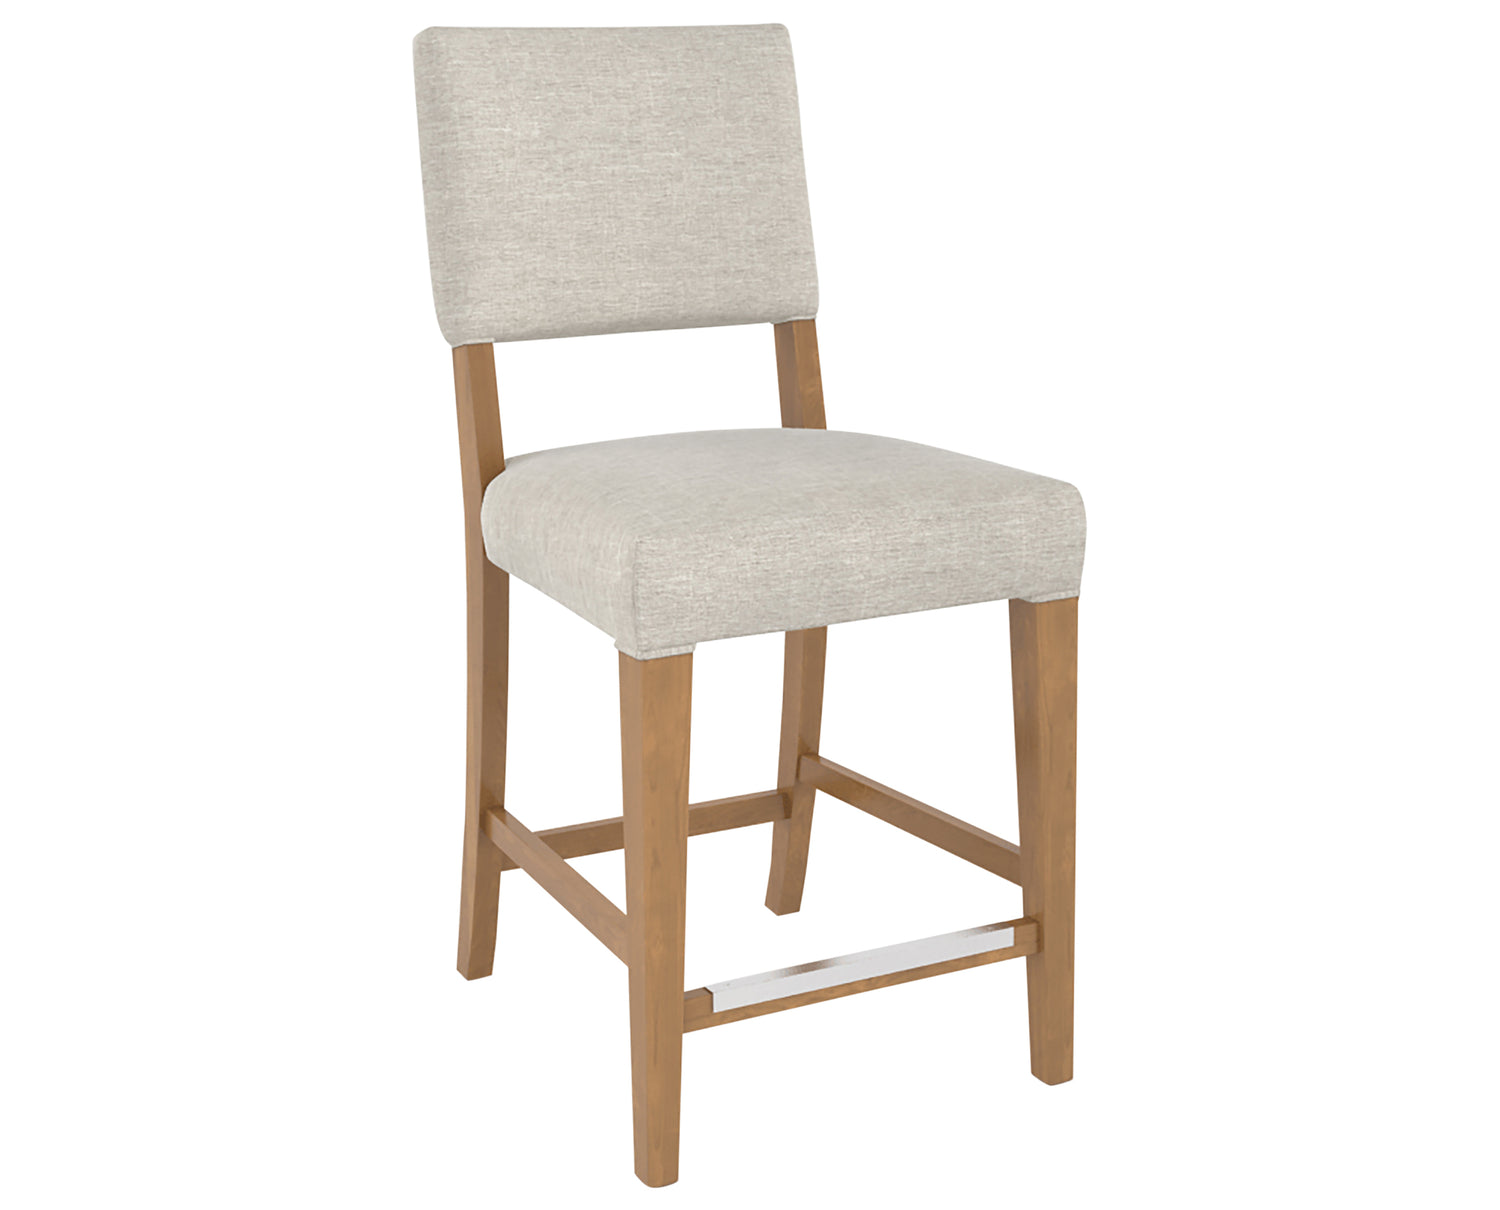 Honey Washed & Fabric TB | Canadel Core Counter Stool 8051 | Valley Ridge Furniture